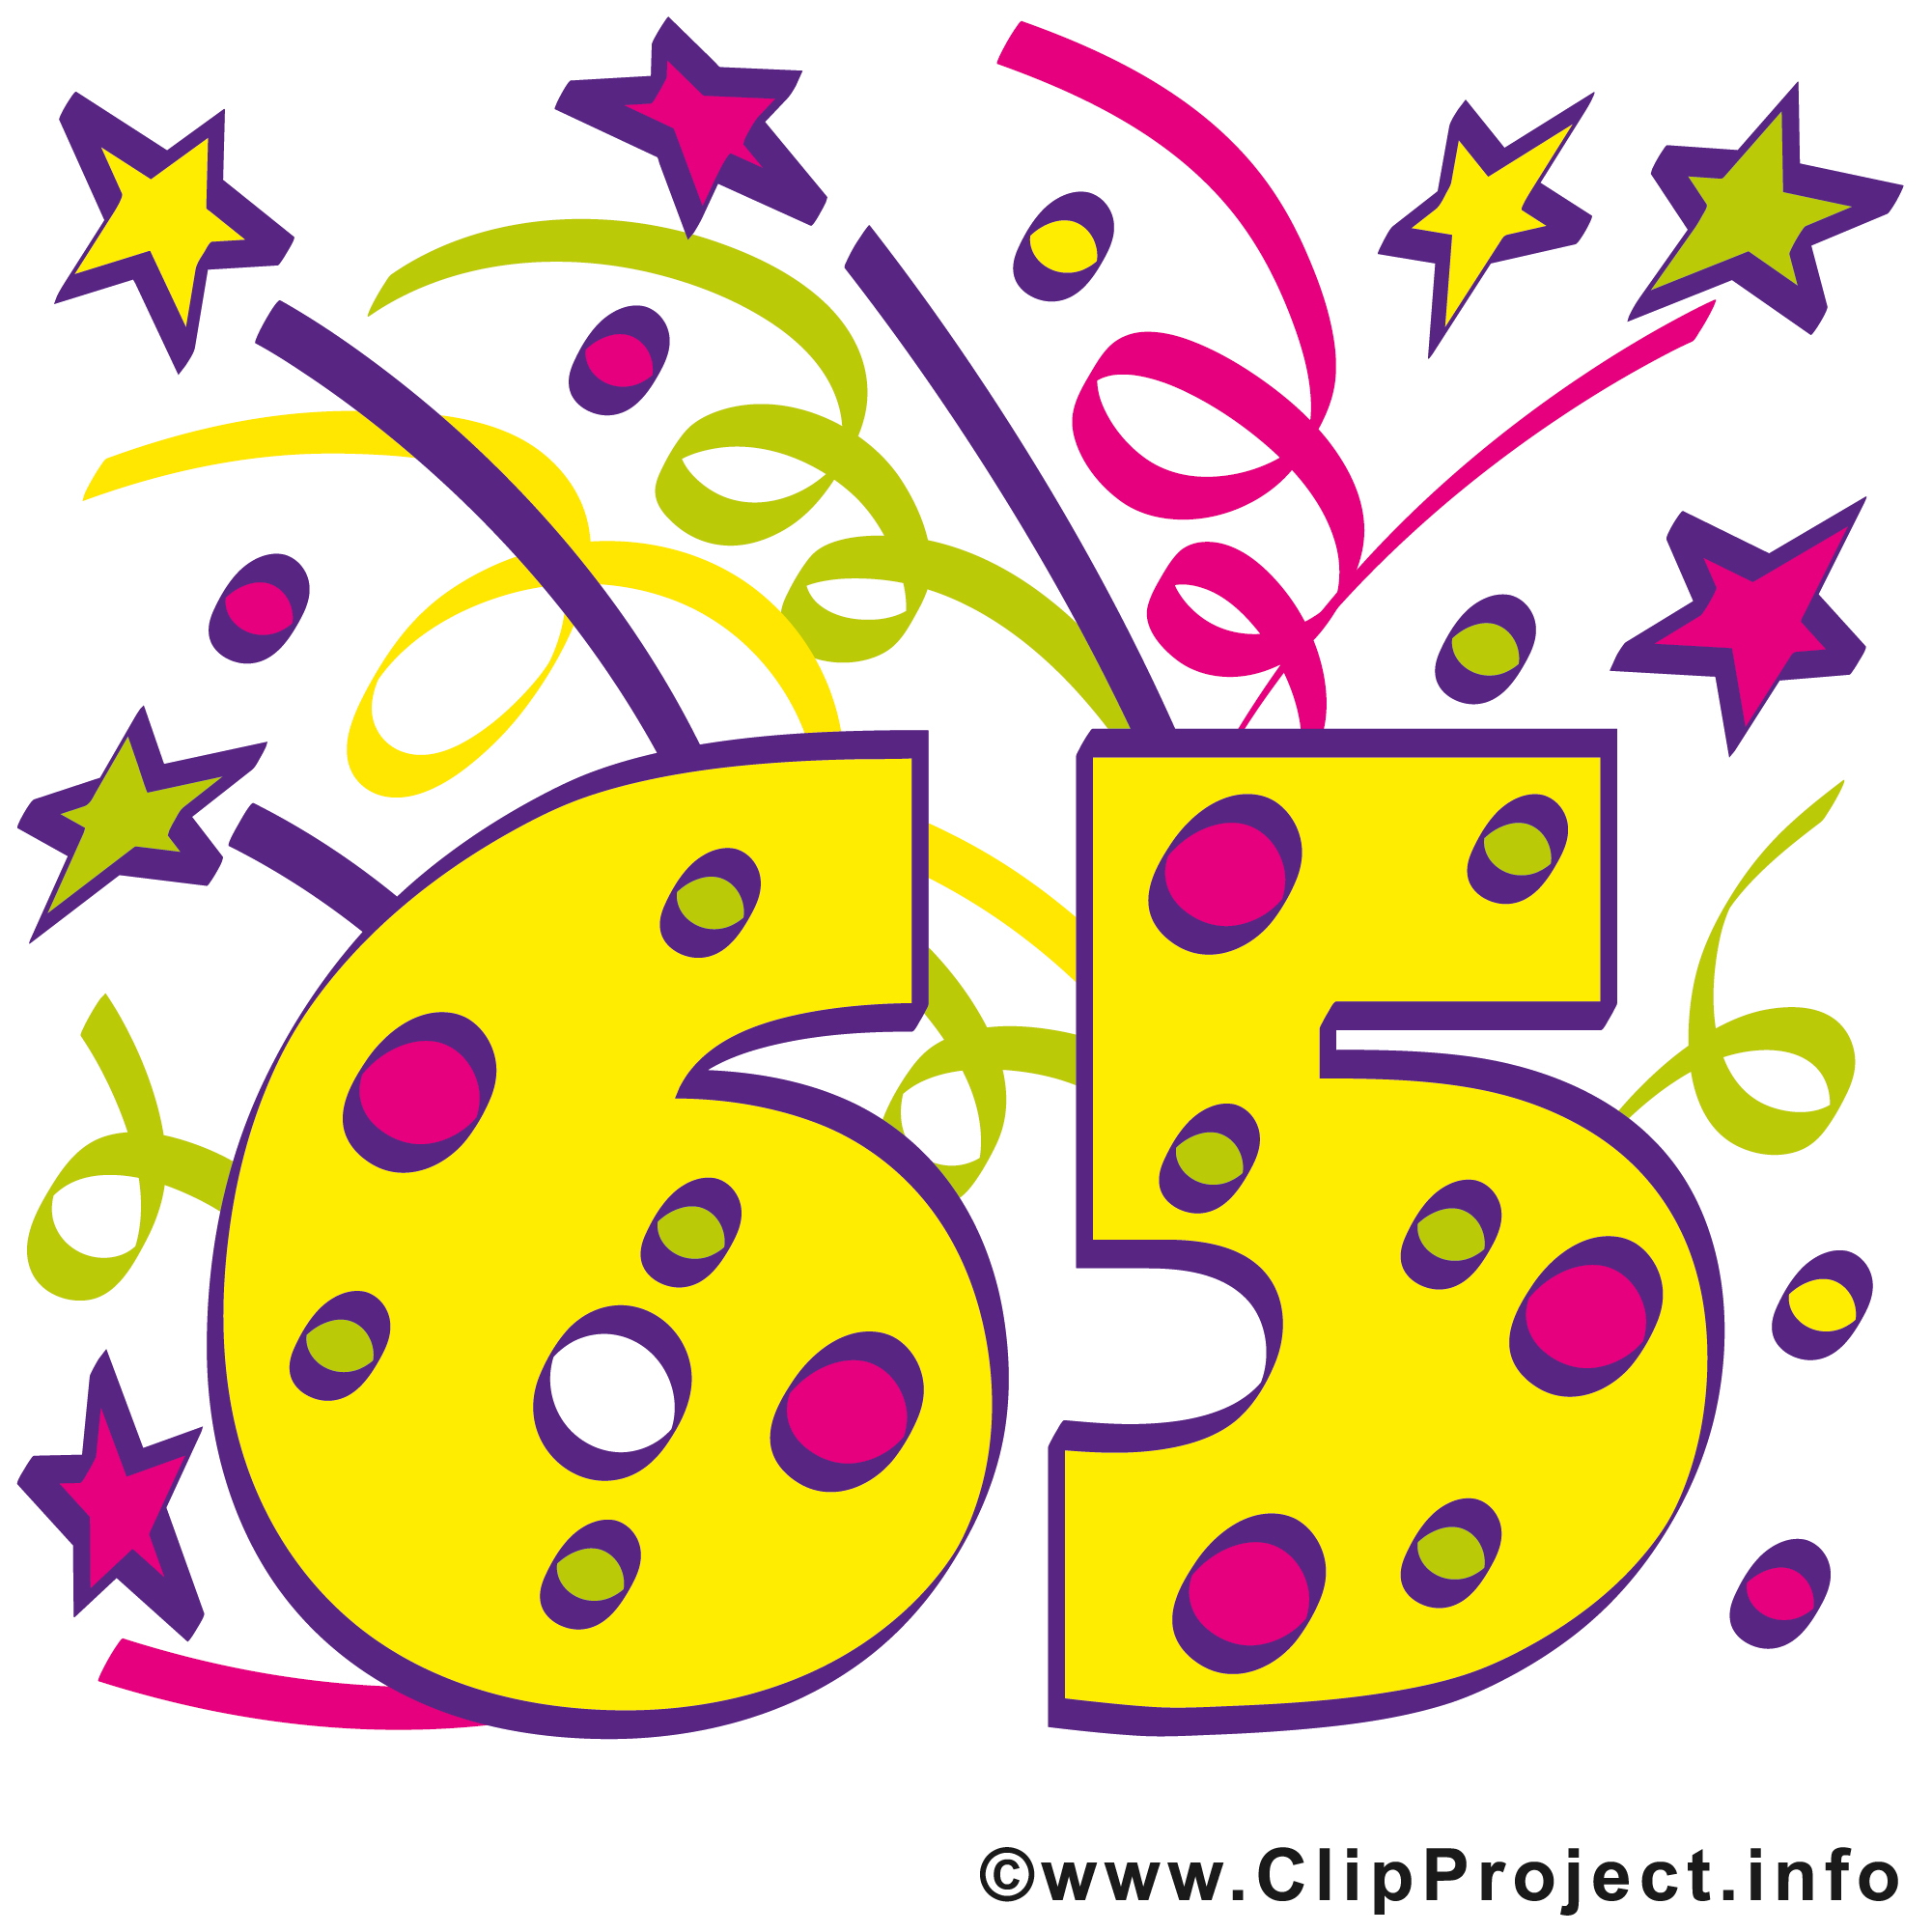 65 clipart - Clipground